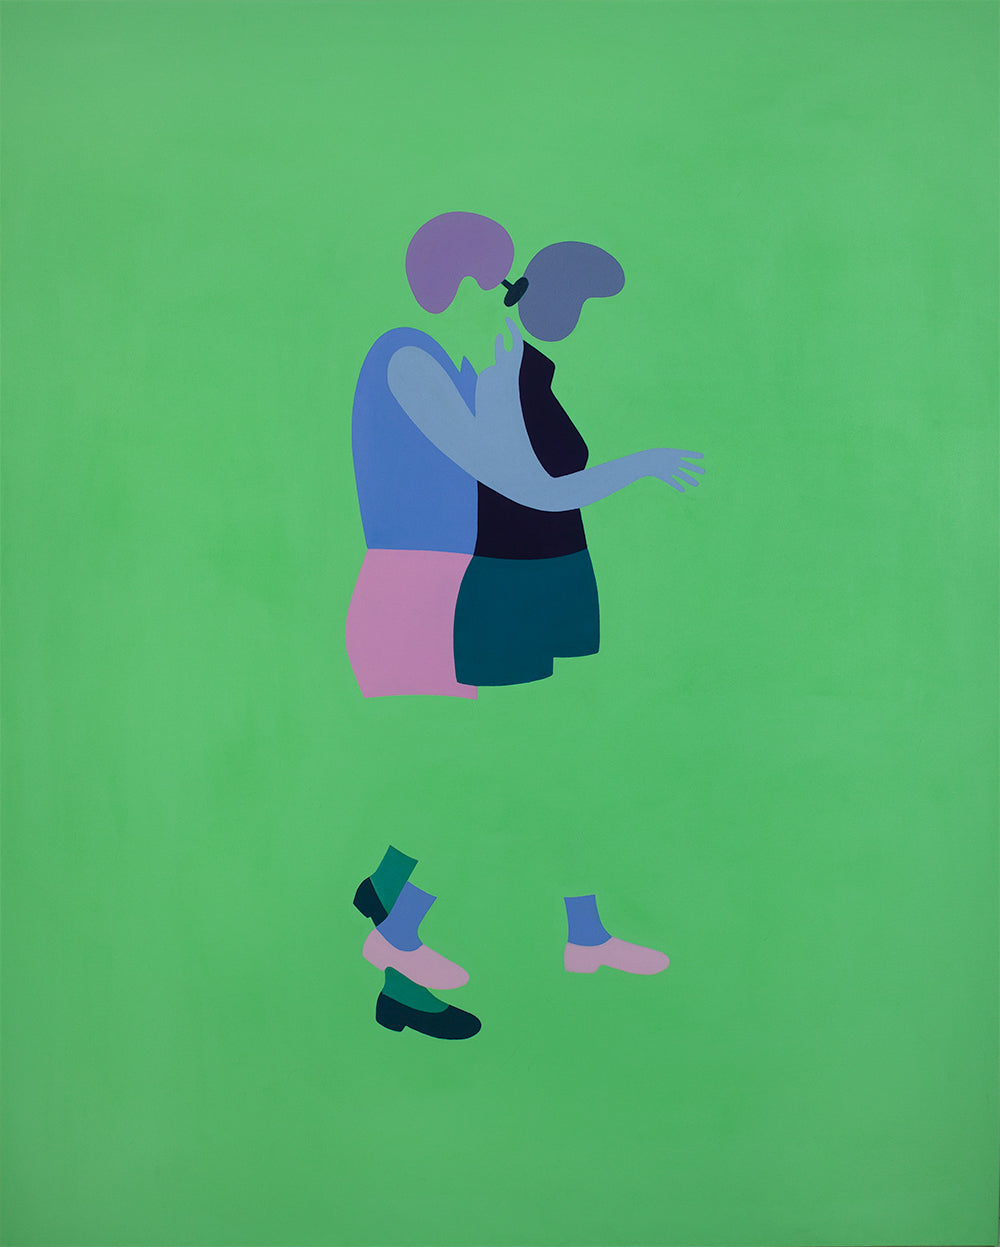 Two Walk to the Right (green, blue and pink),